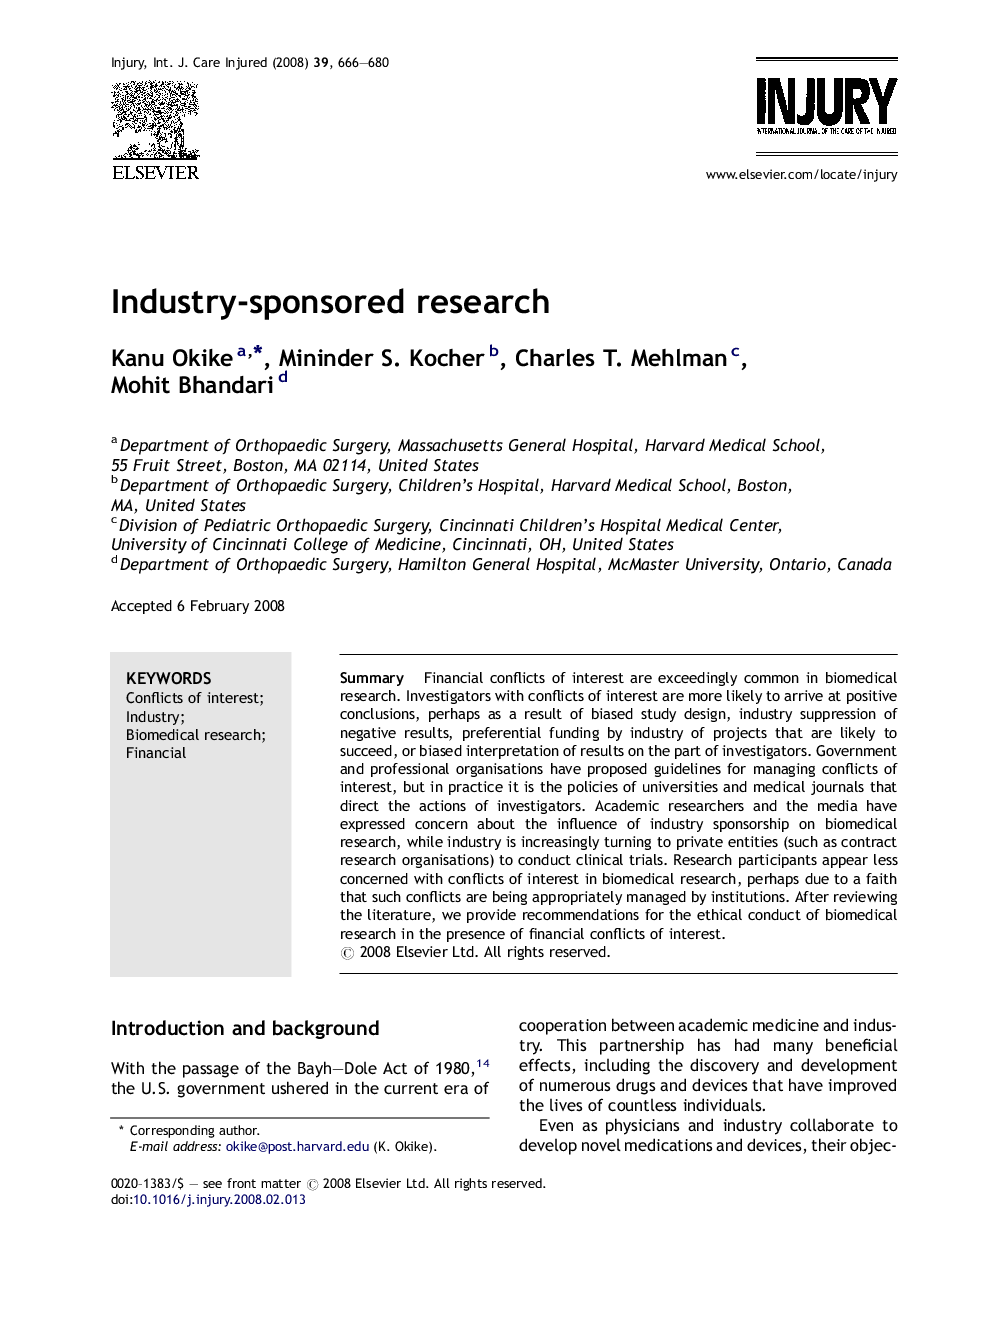 Industry-sponsored research